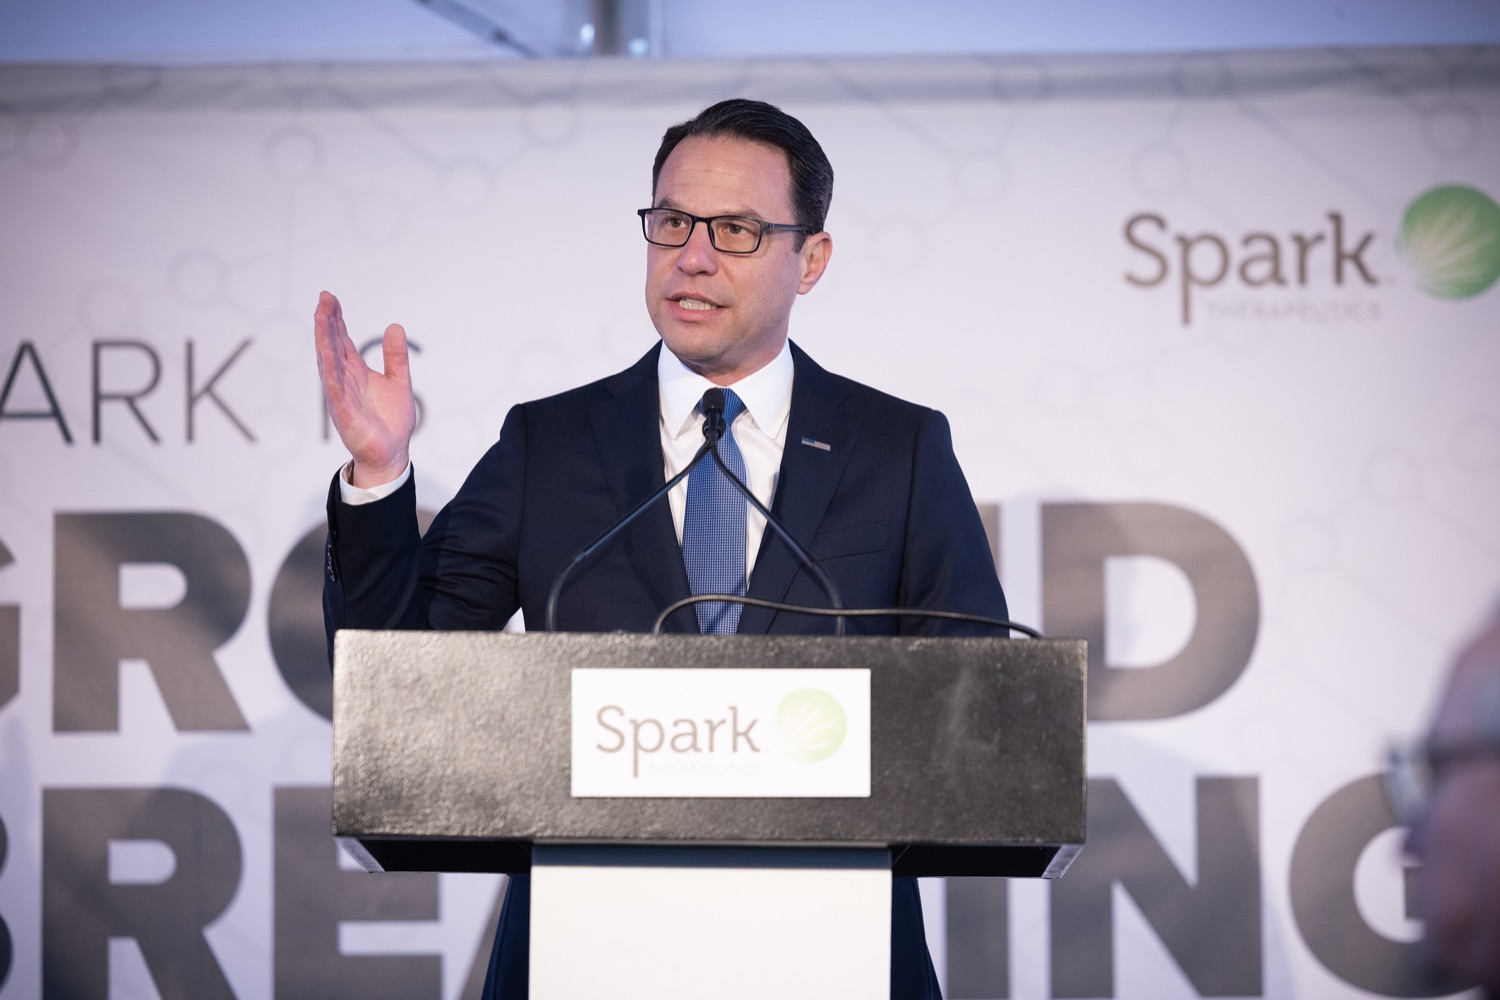 Pennsylvania Governor Josh Shapiro speaks with the press.   Pennsylvania Governor Josh Shapiro participates in a groundbreaking for Spark Therapeutics at the future site of their new building, at 30th and Chestnut streets.  FEBRUARY 28, 2023 - PHILADELPHIA, PA<br><a href="https://filesource.amperwave.net/commonwealthofpa/photo/22728_gov_spark_dz_0005.JPG" target="_blank">⇣ Download Photo</a>